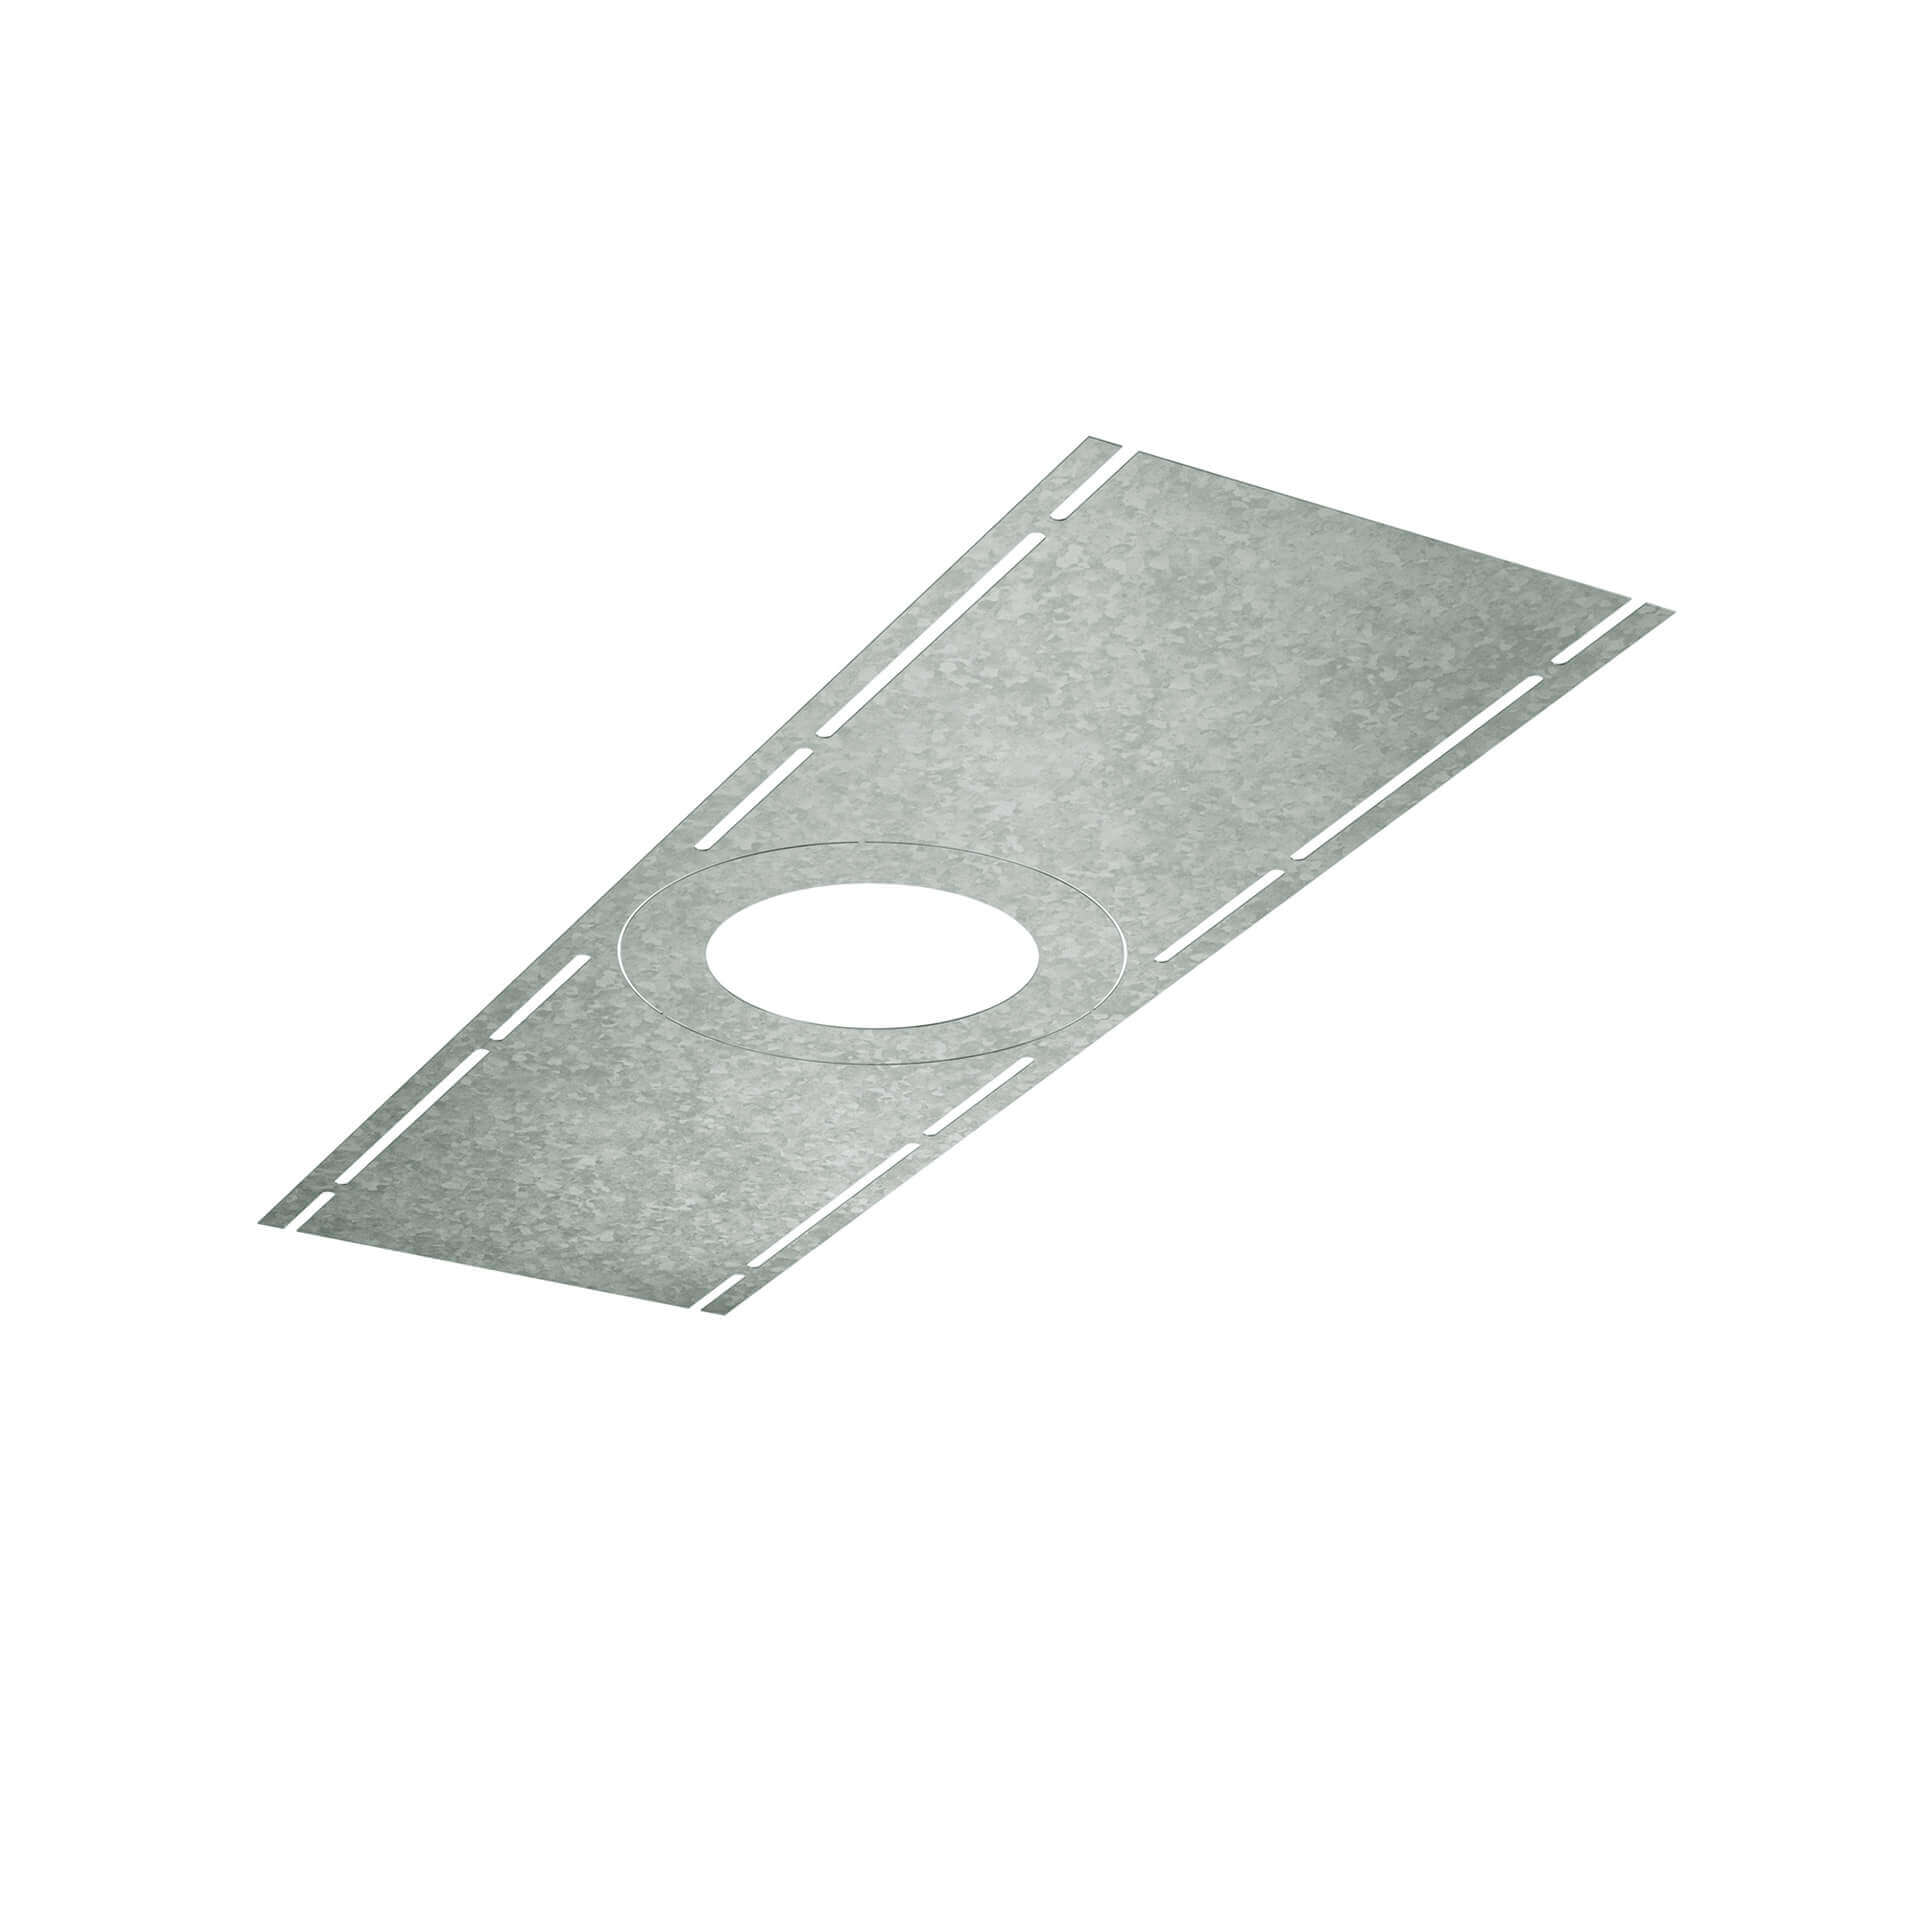 Universal Flat rough-in plate for 2 